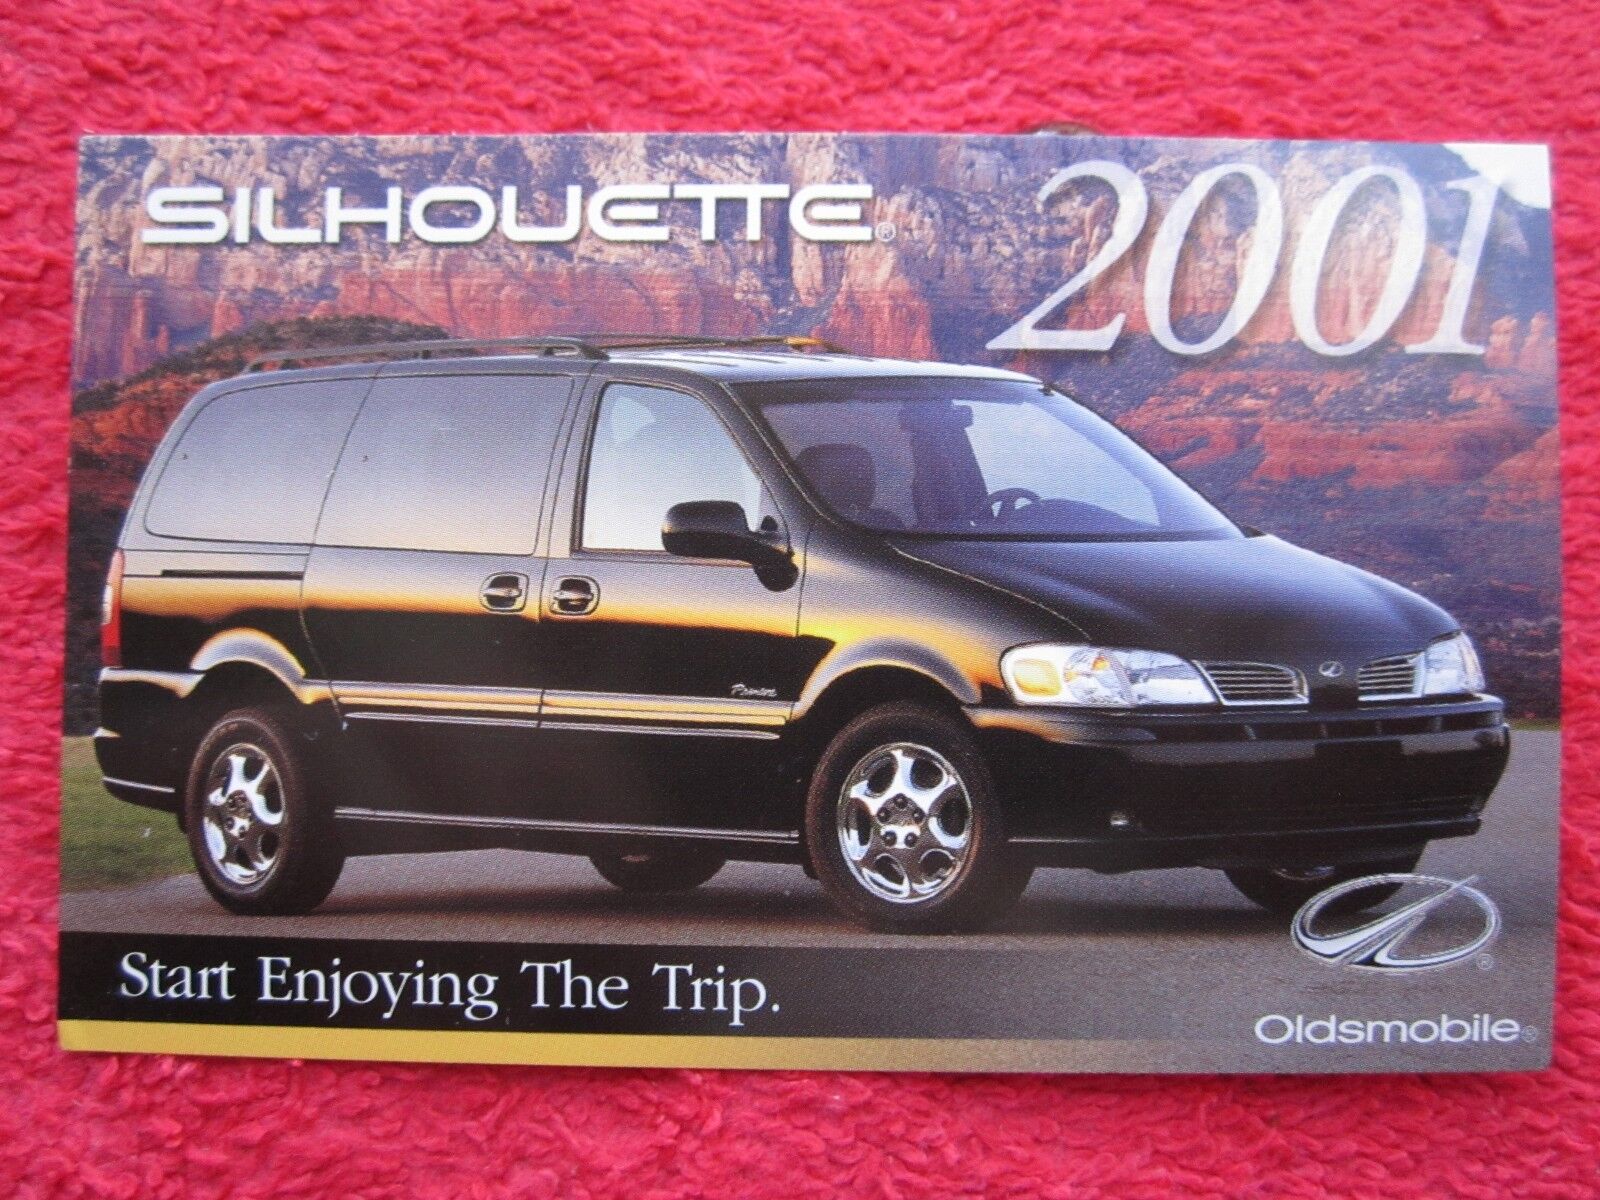 2001 OLDSMOBILE SILHOUETTE FACTORY FEATURES / INFO CARD #2 | eBay